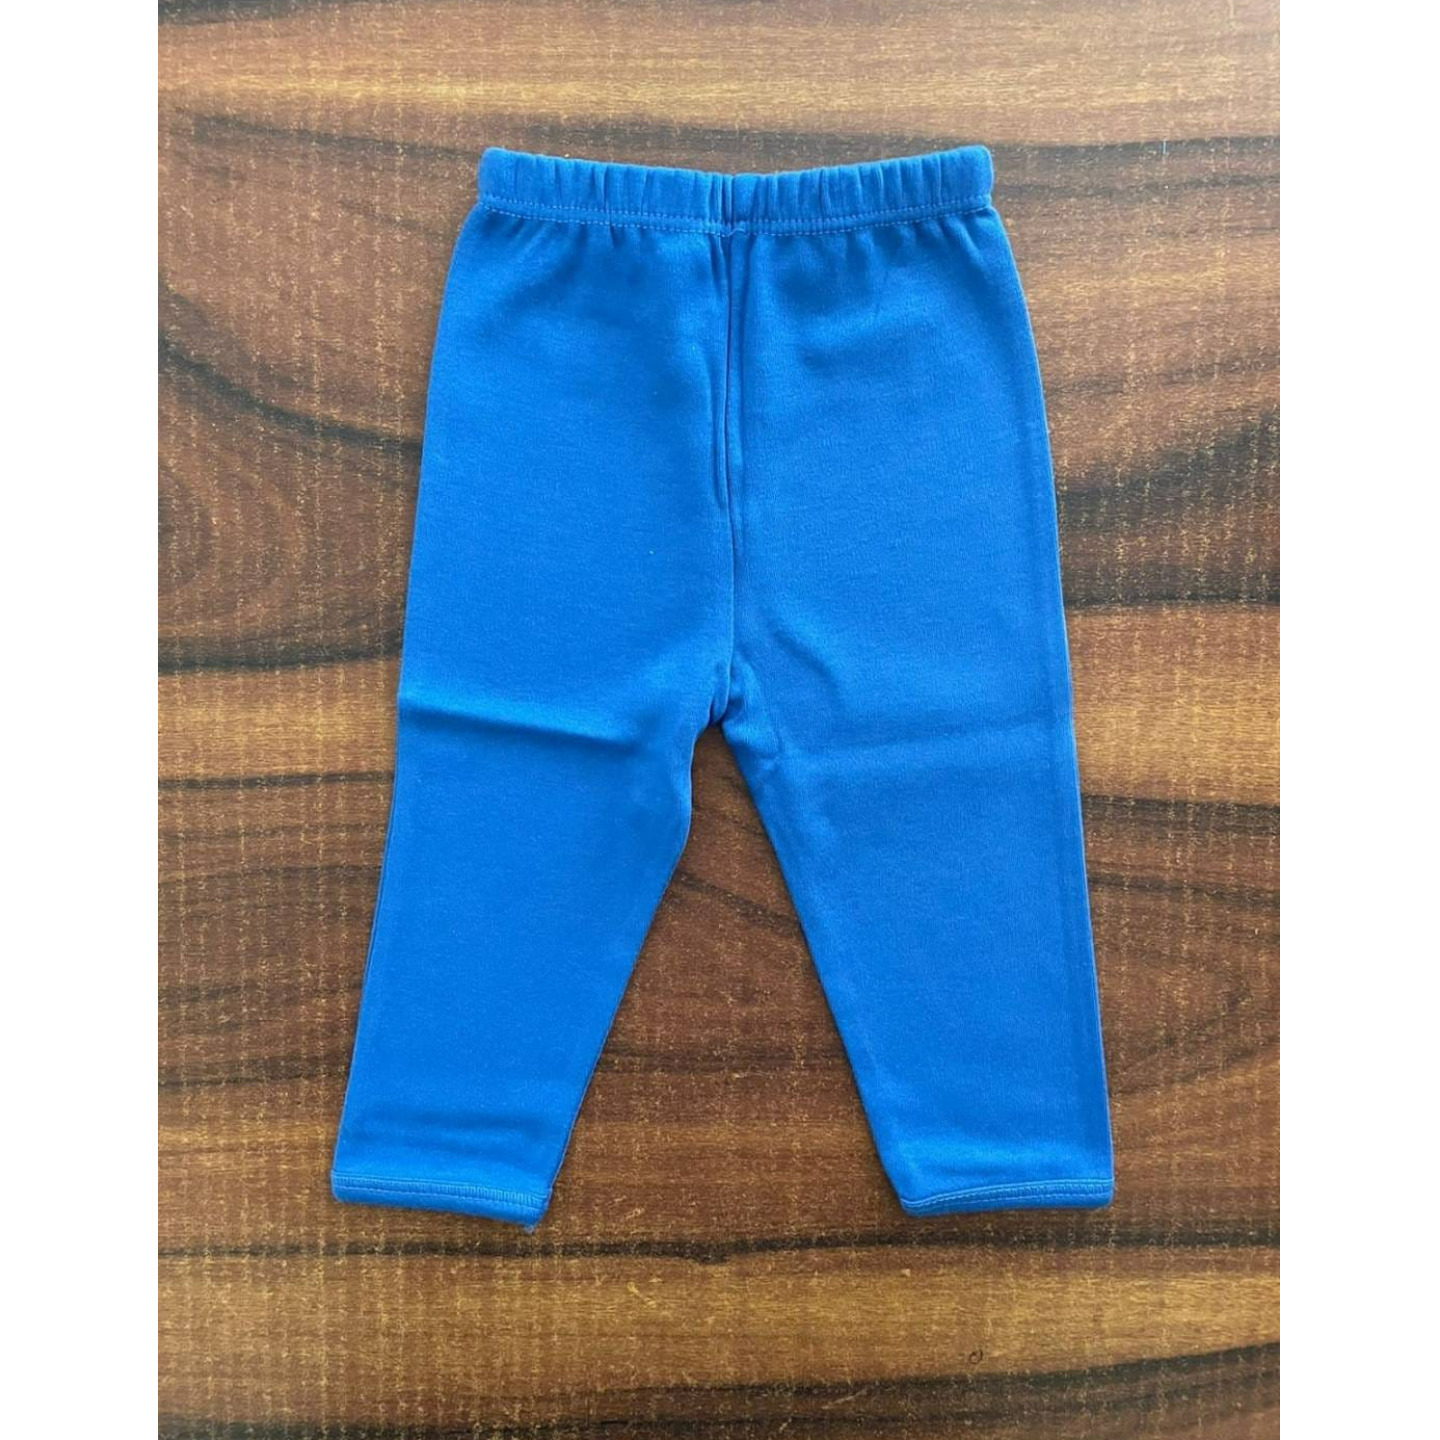 Cradle Togs Leggings Rs 165 Only 3 to 6 Months Size